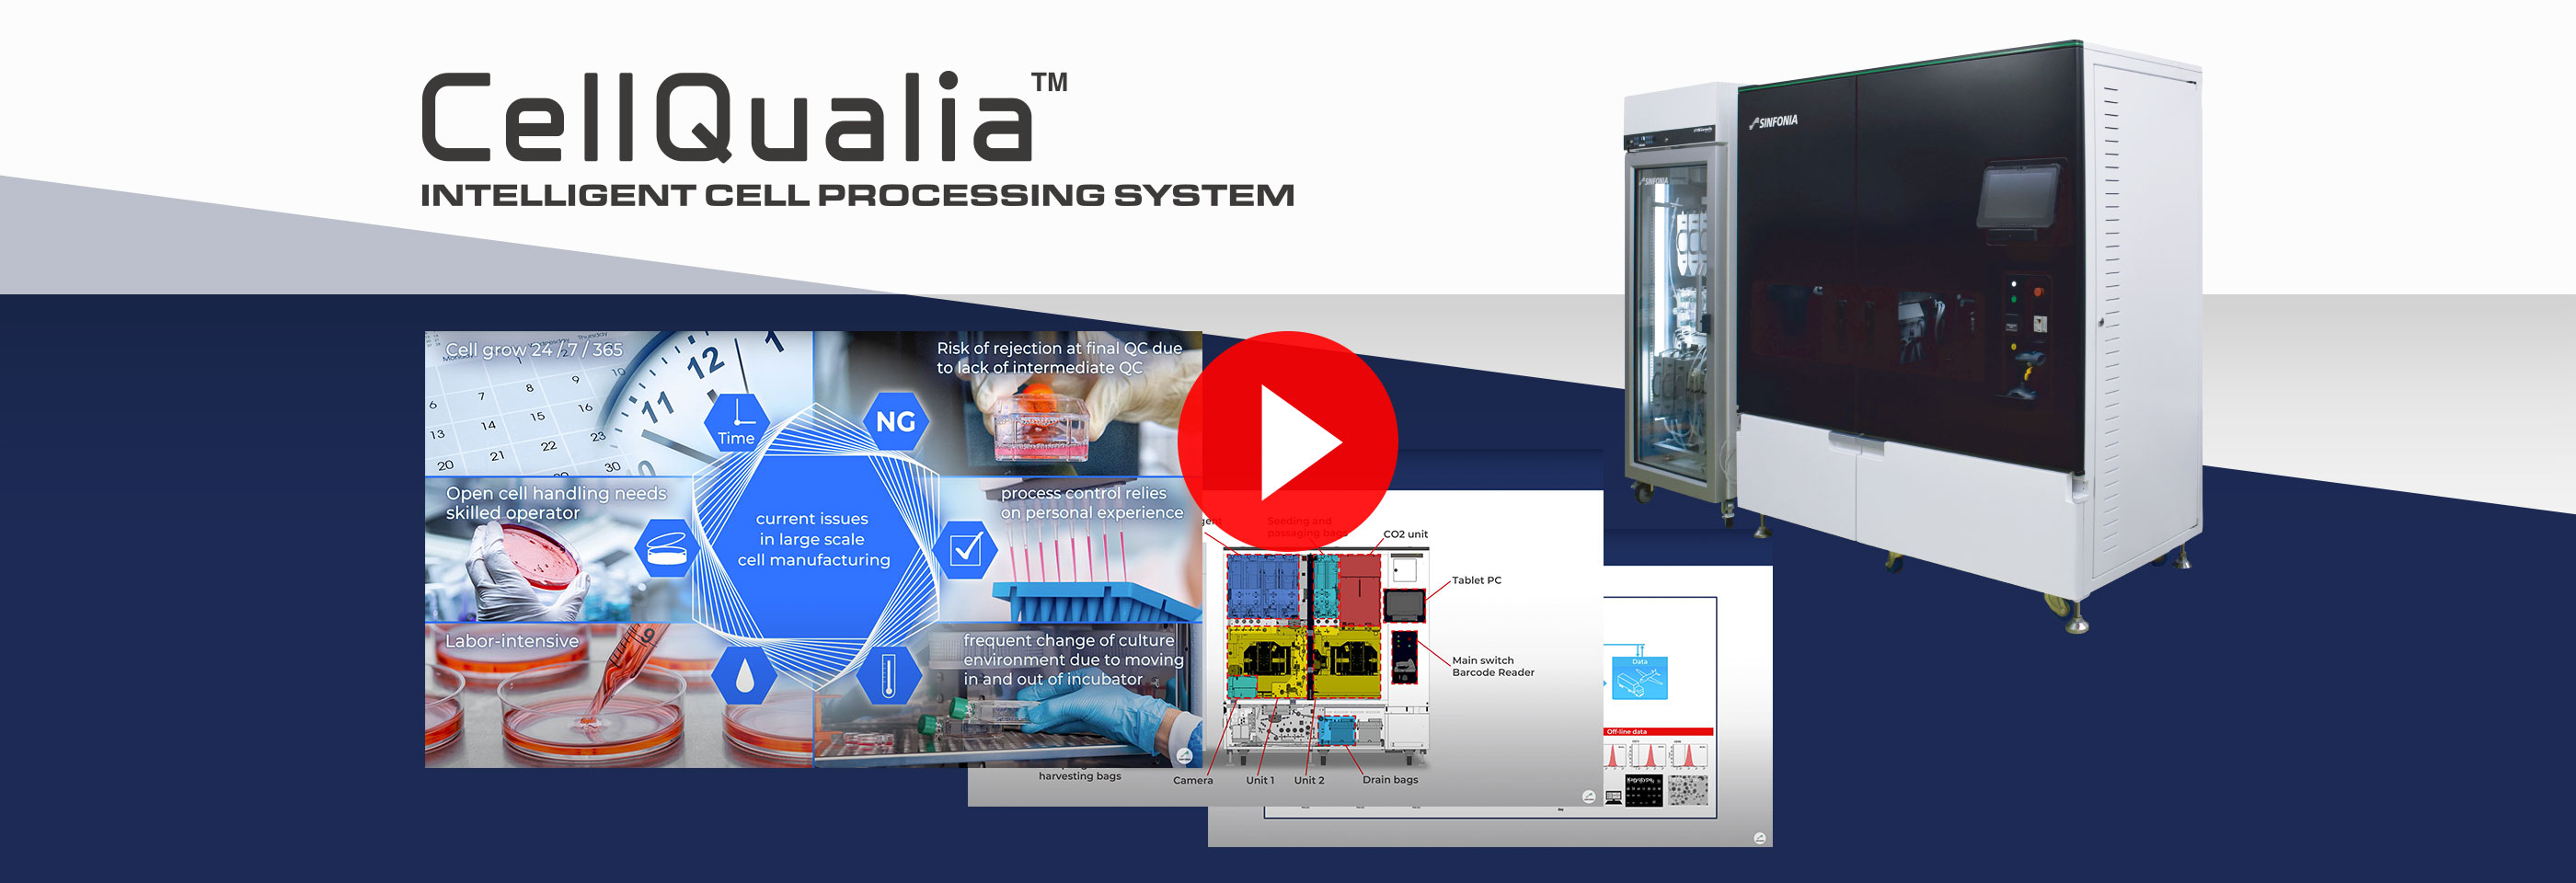 CellQualia INTELLIGENT CELL PROCESSING SYSTEM